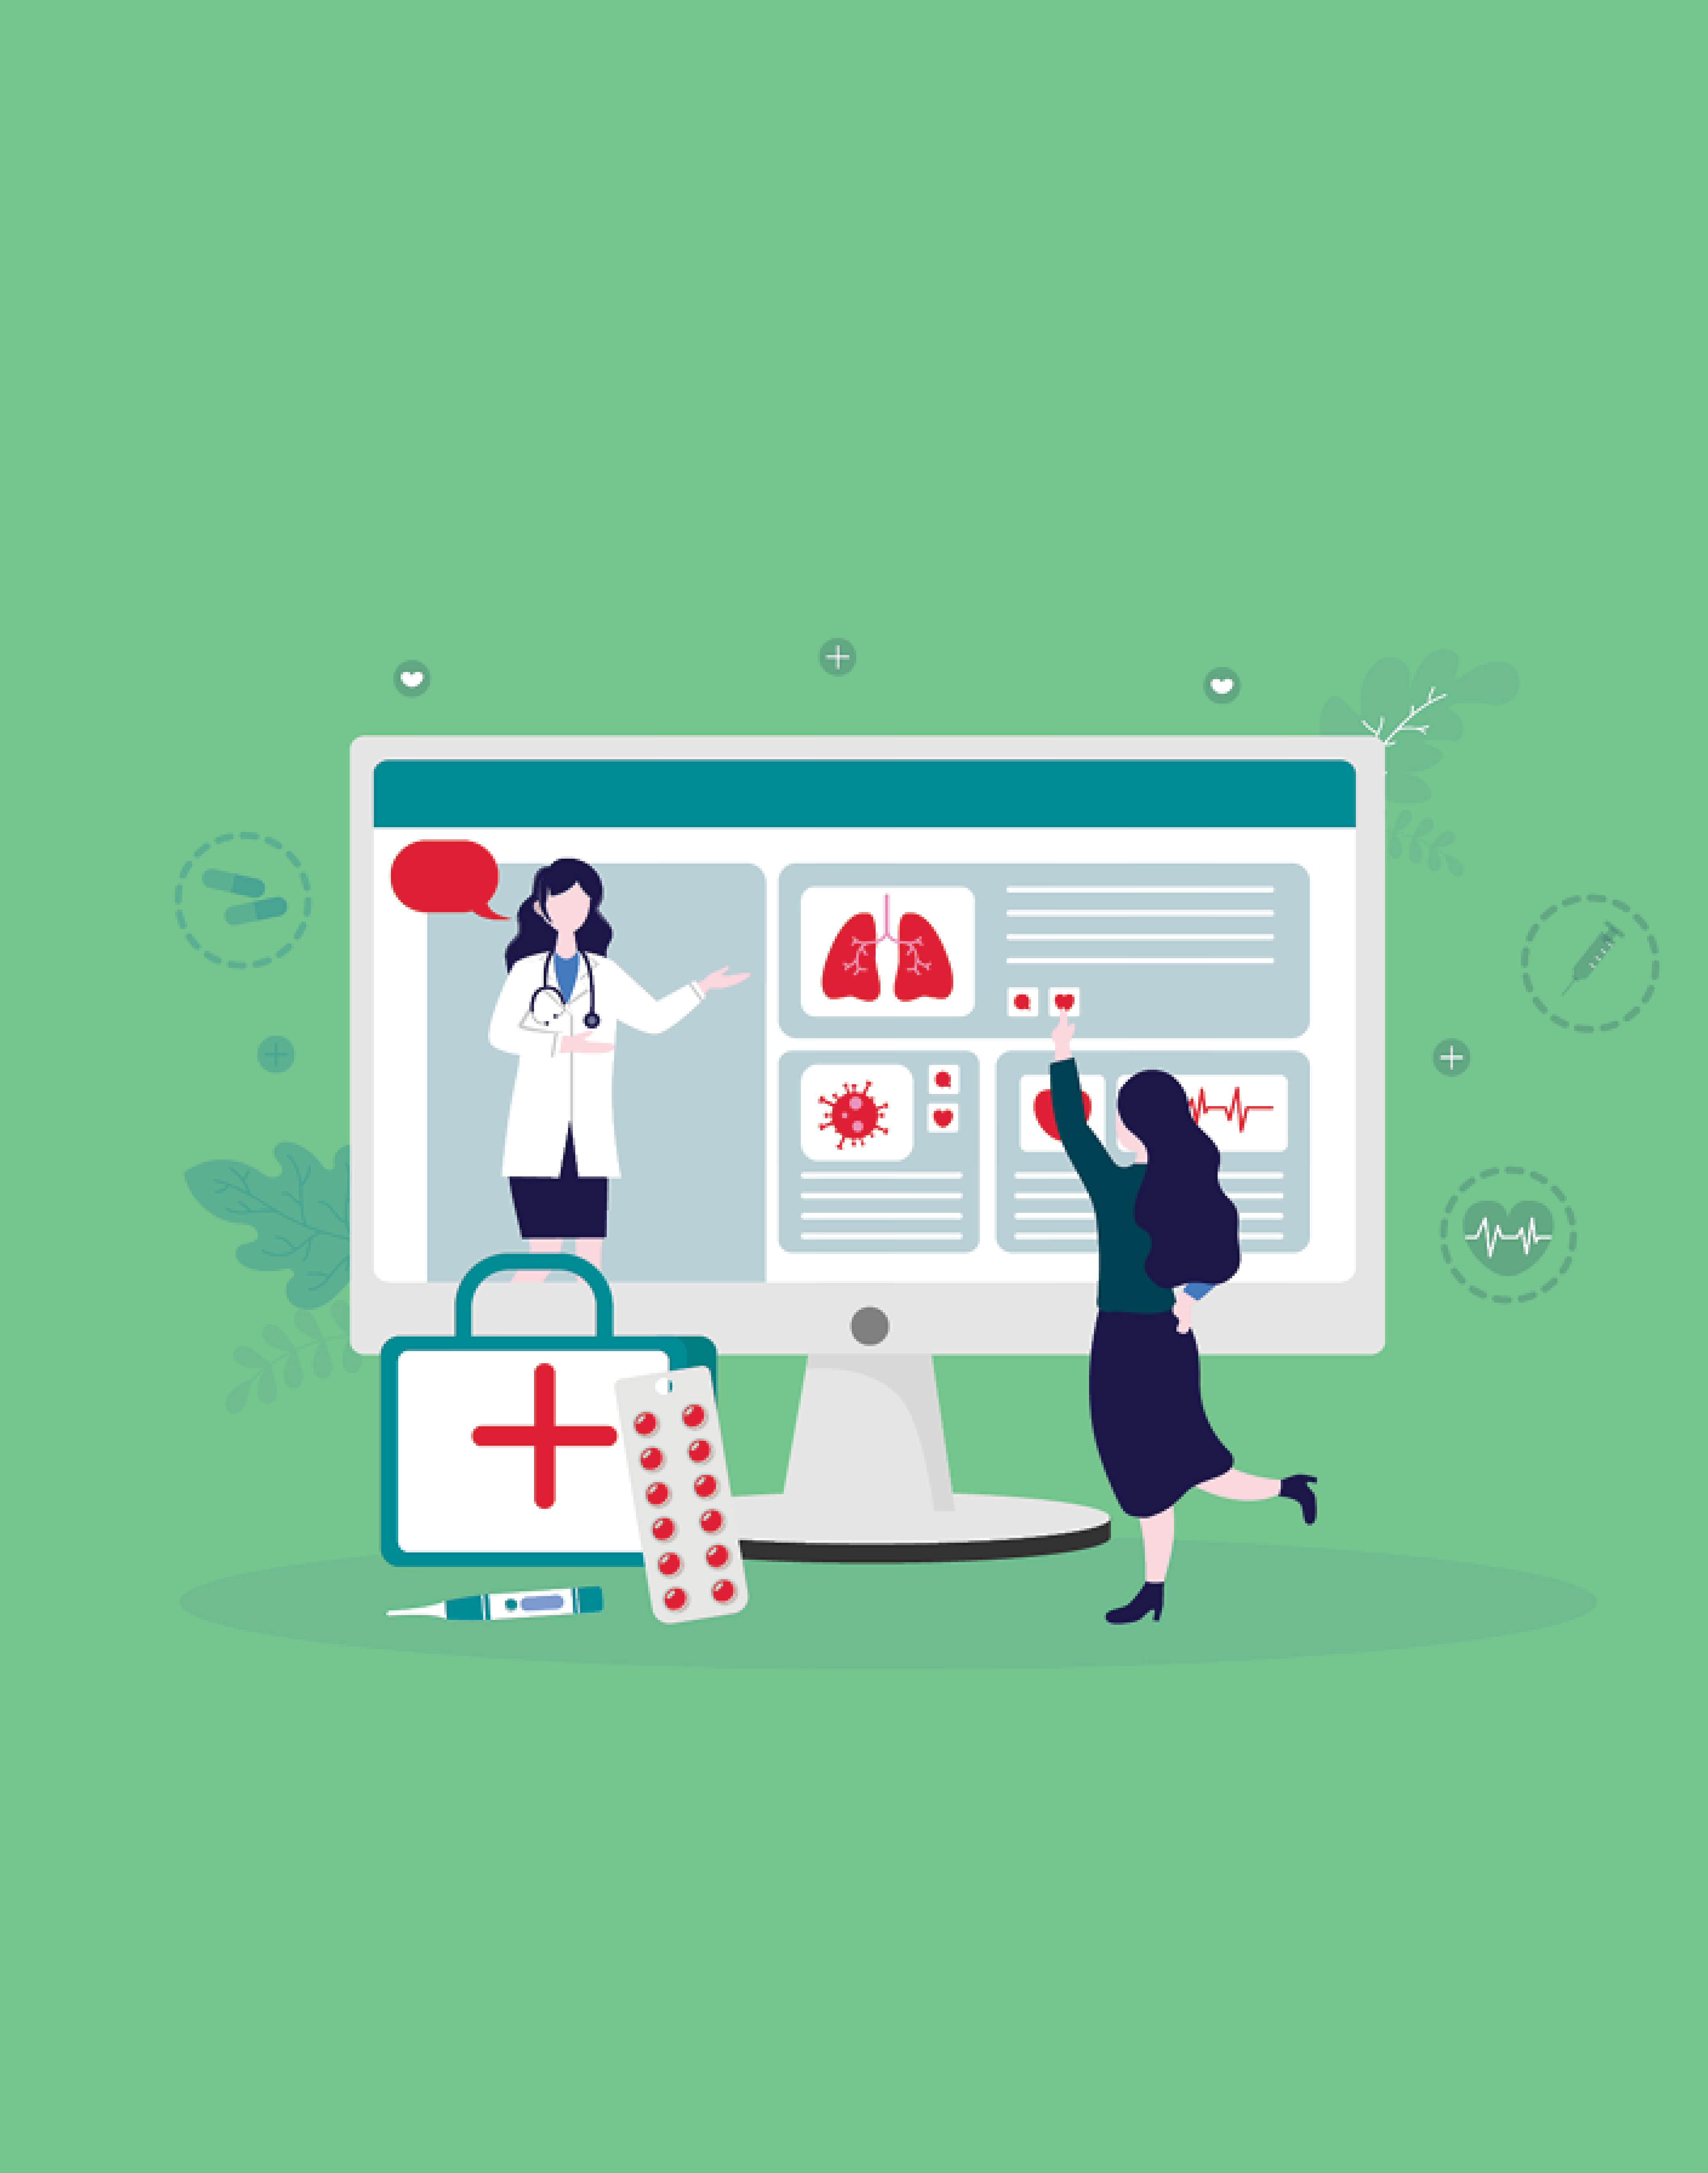 How to Promote Patient Engagement at Every Step of the Patient Journey